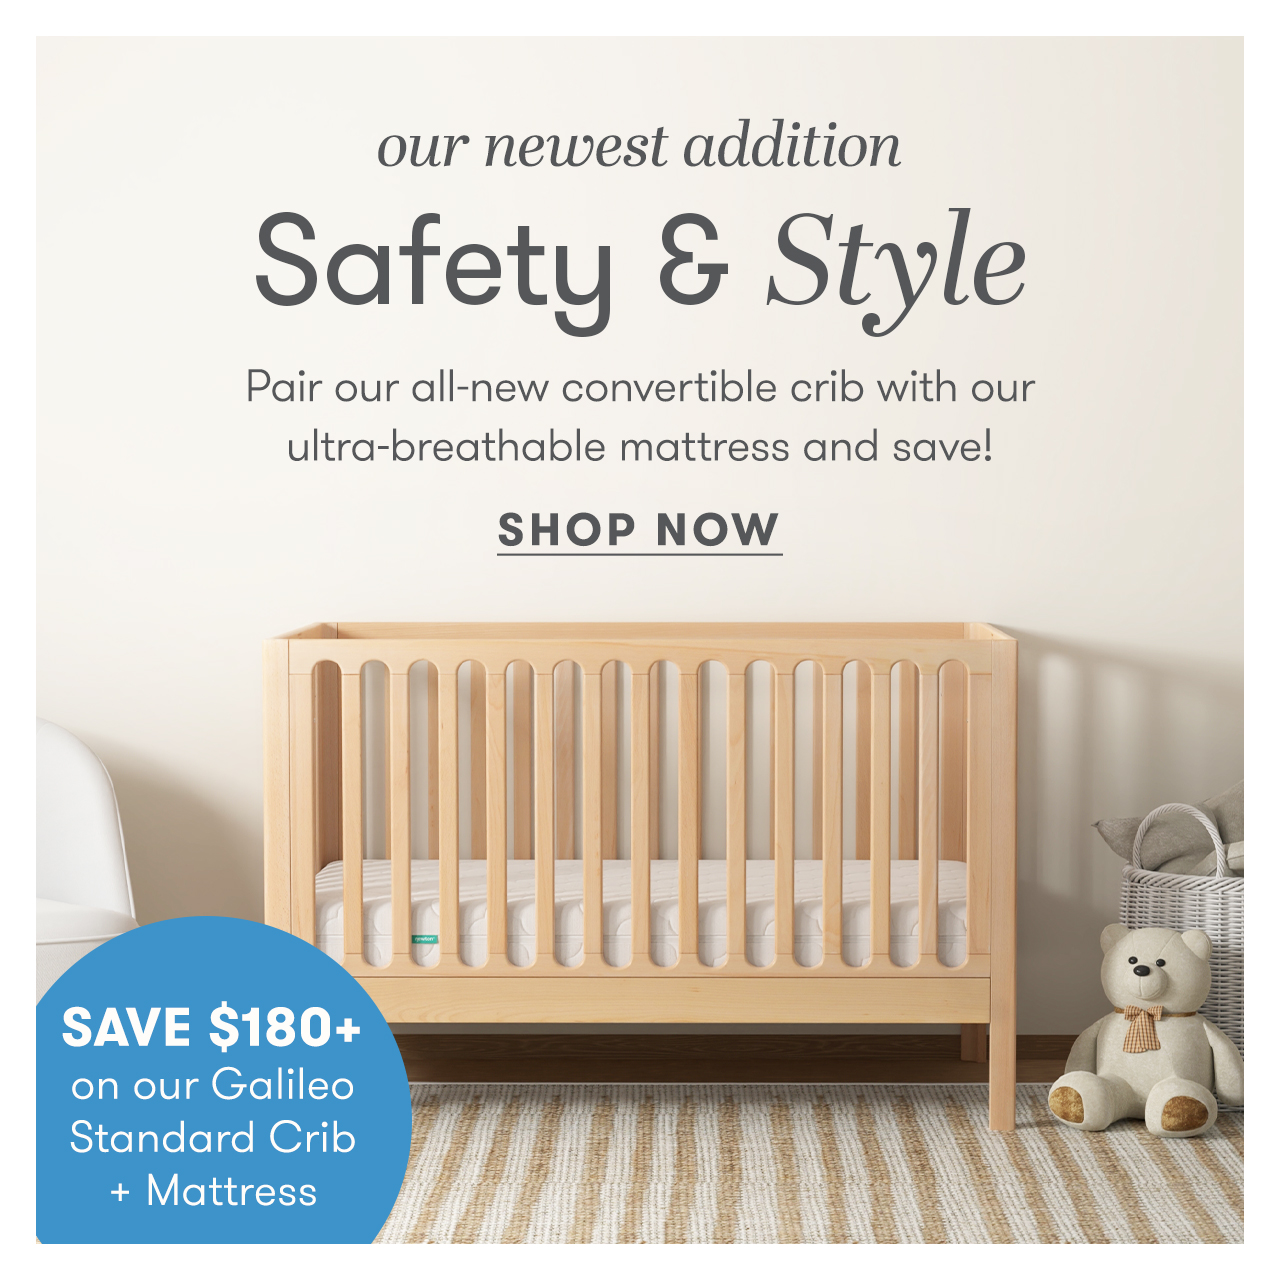 Save $180 on our newest addition when you combine it with a crib mattress.